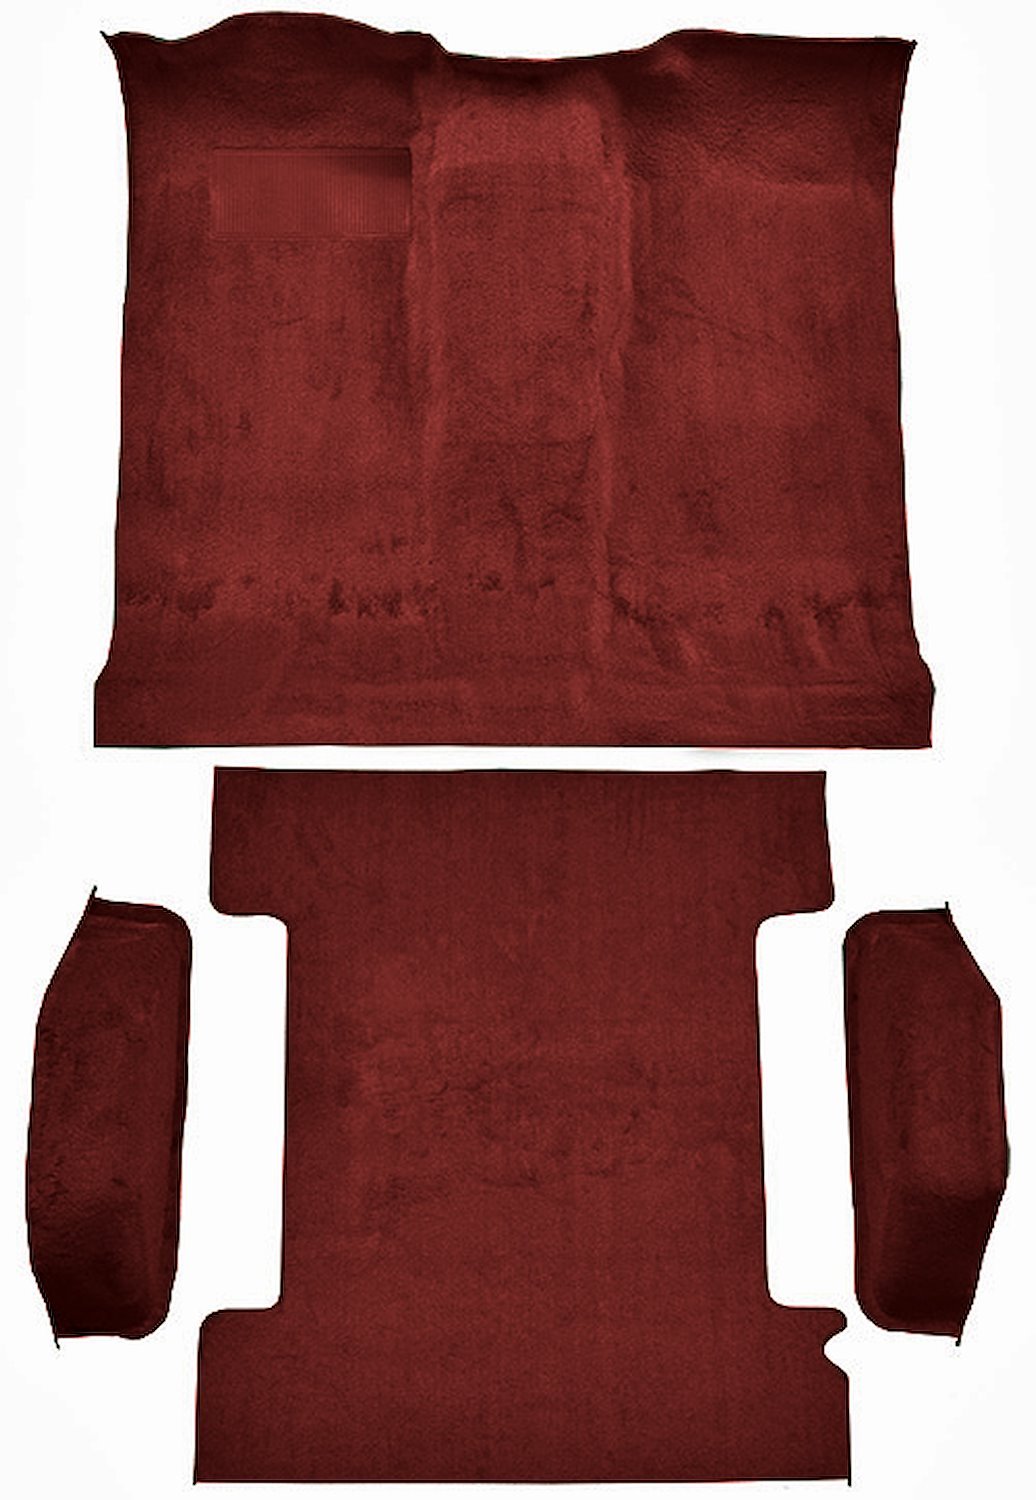 Molded Cut Pile Passenger and Cargo Area Carpet for 1974-1977 Chevy Blazer, GMC Jimmy [Mass Backing, 4-Piece, Oxblood]